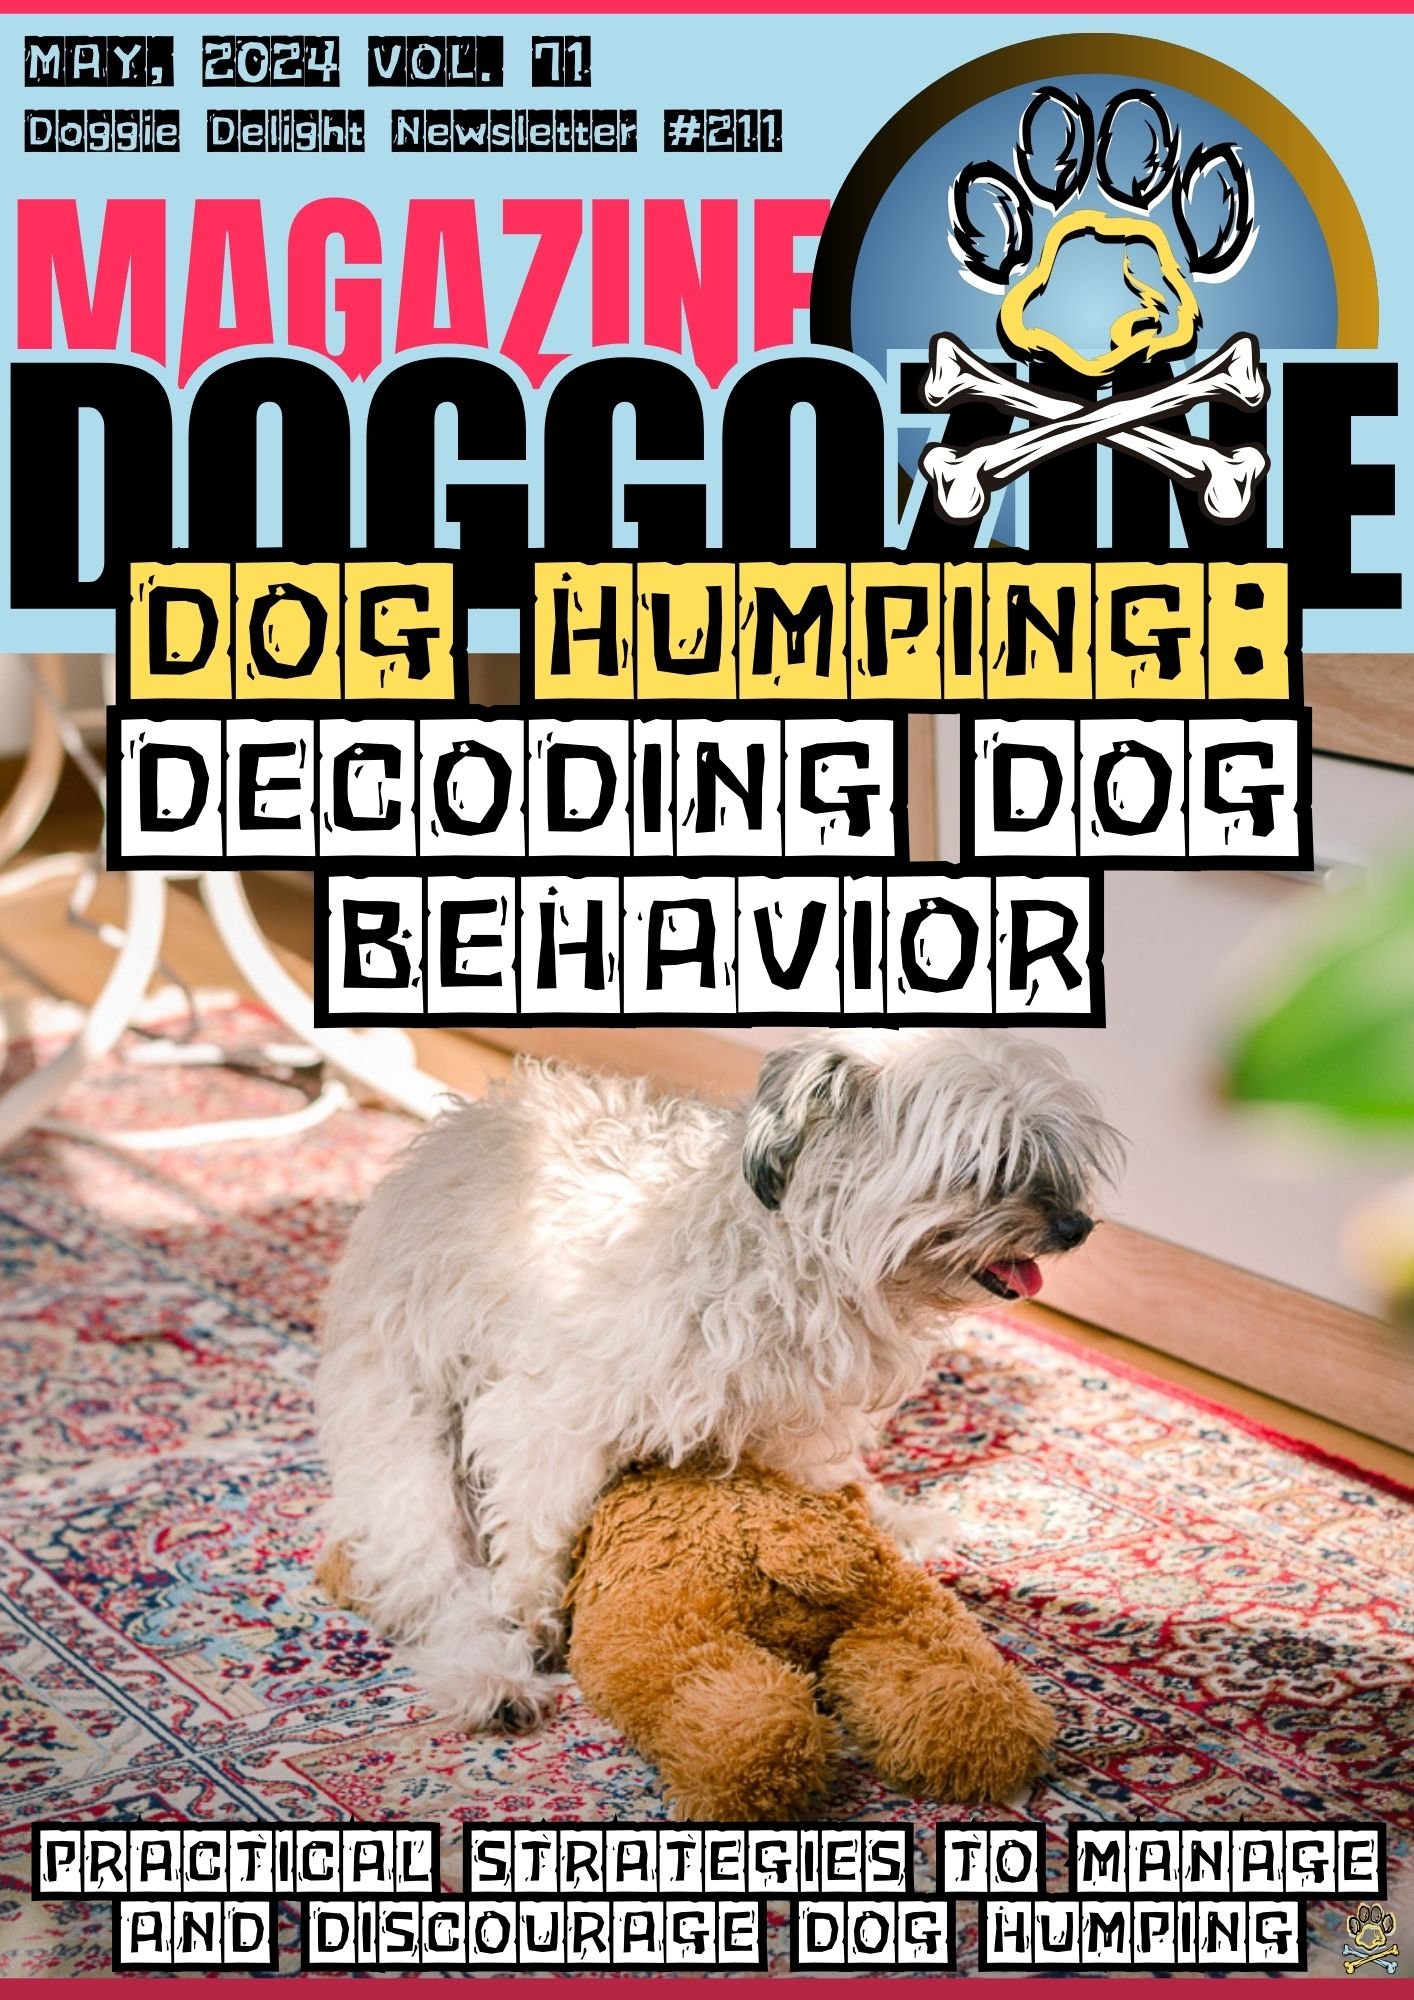 dog humping cover